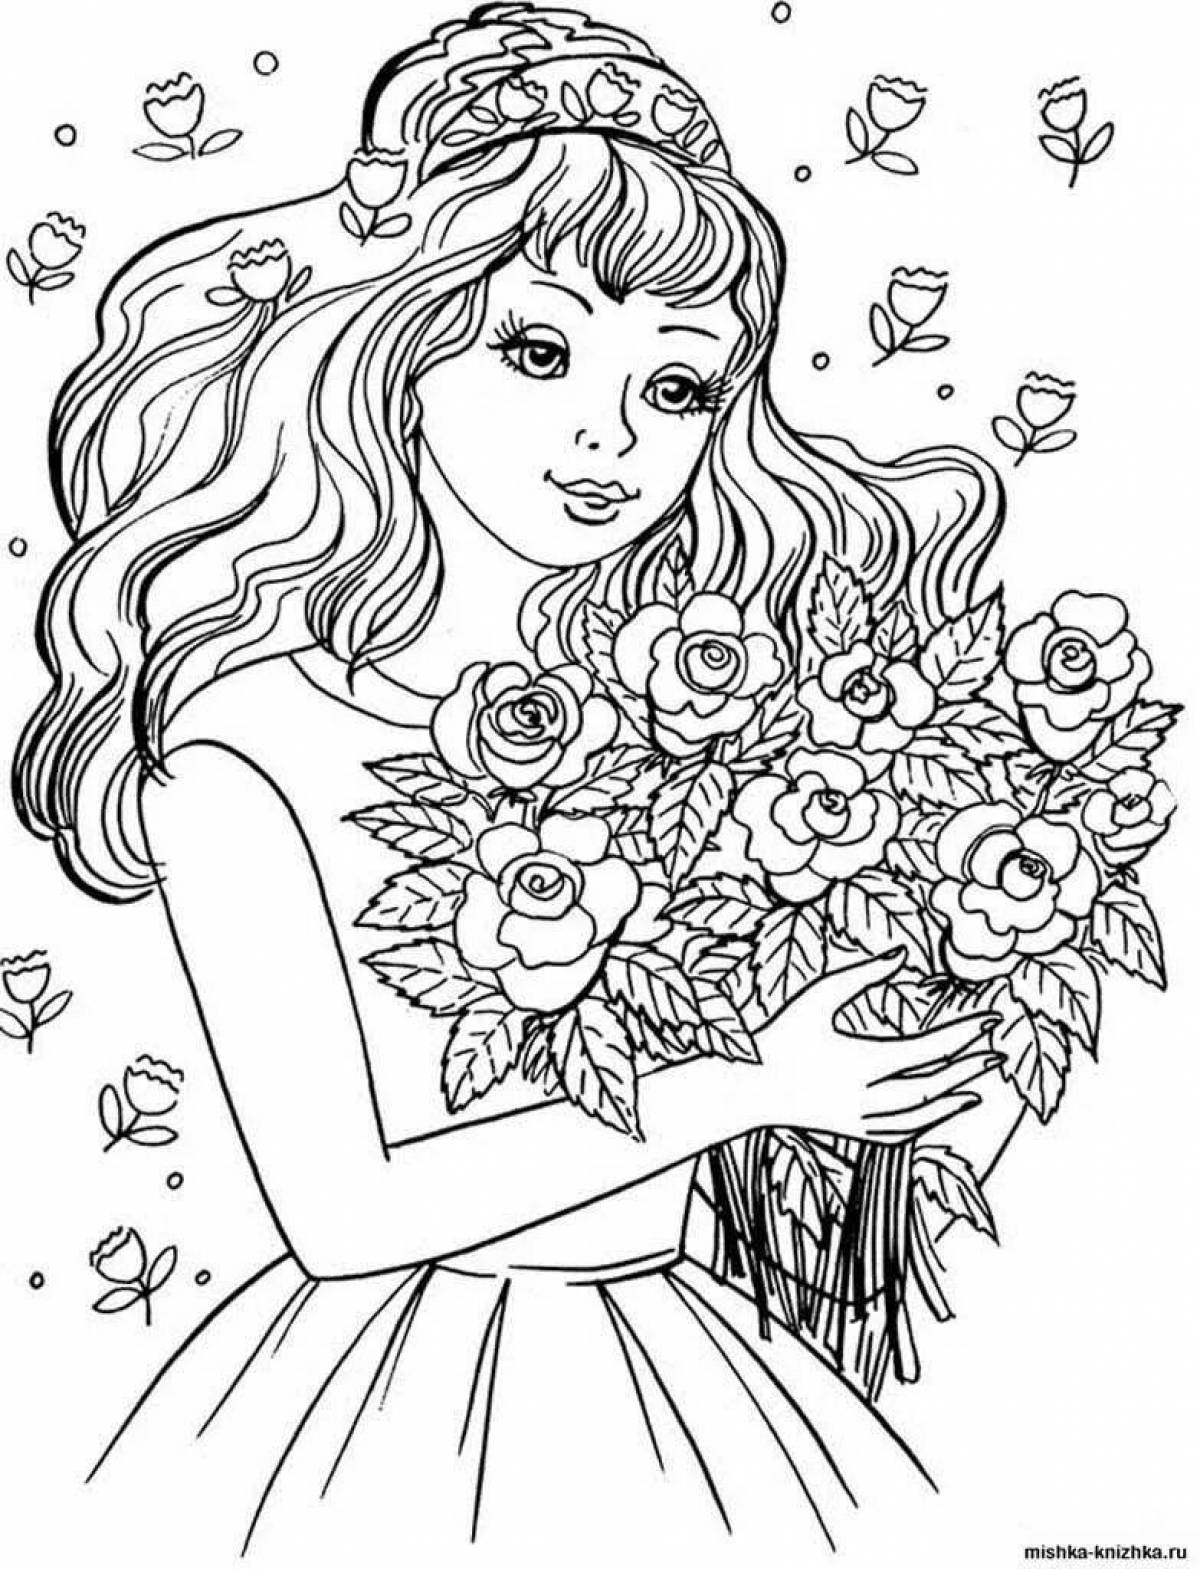 Incredible coloring book for 100 year old girls